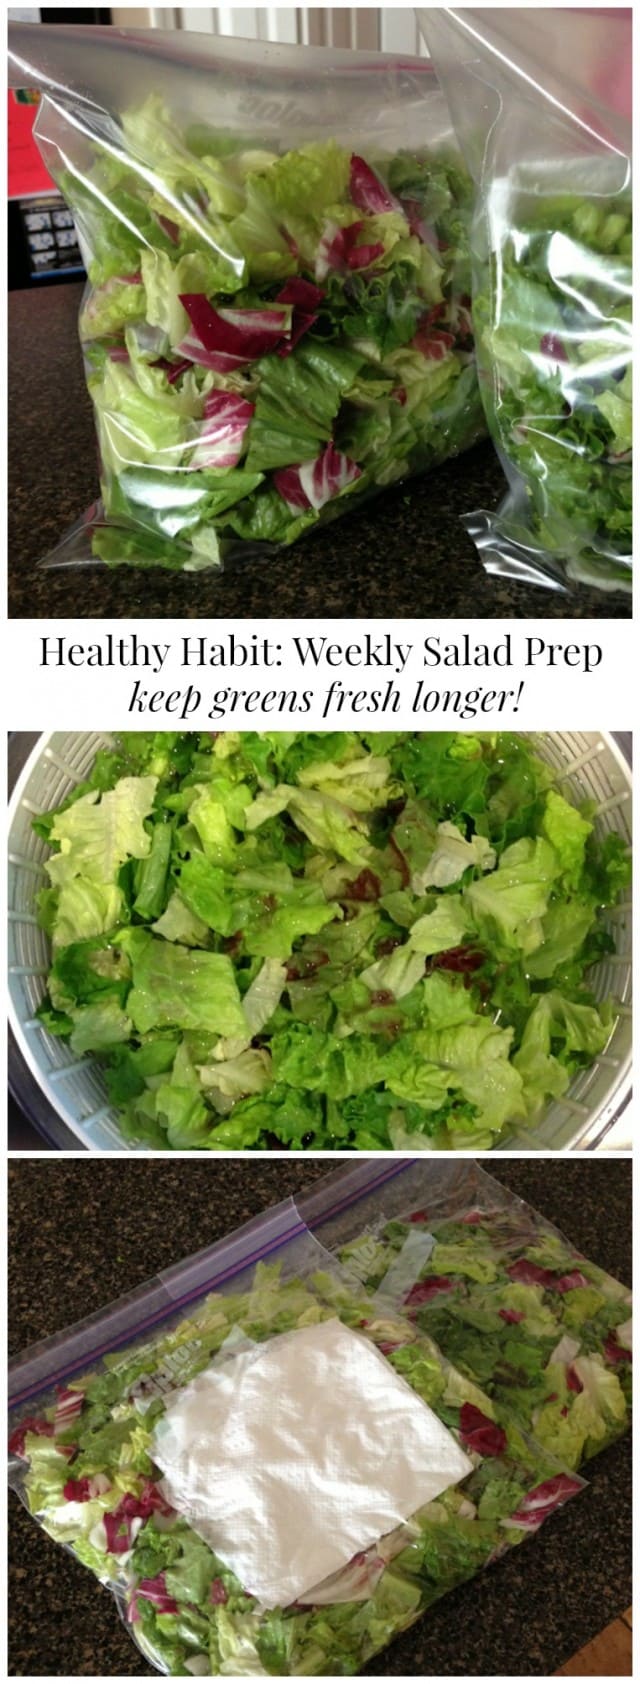 How I get myself to eat more salads! My weekly salad prep saves time in the long run, makes it convenient and the best part, keep my salad greens FRESH!